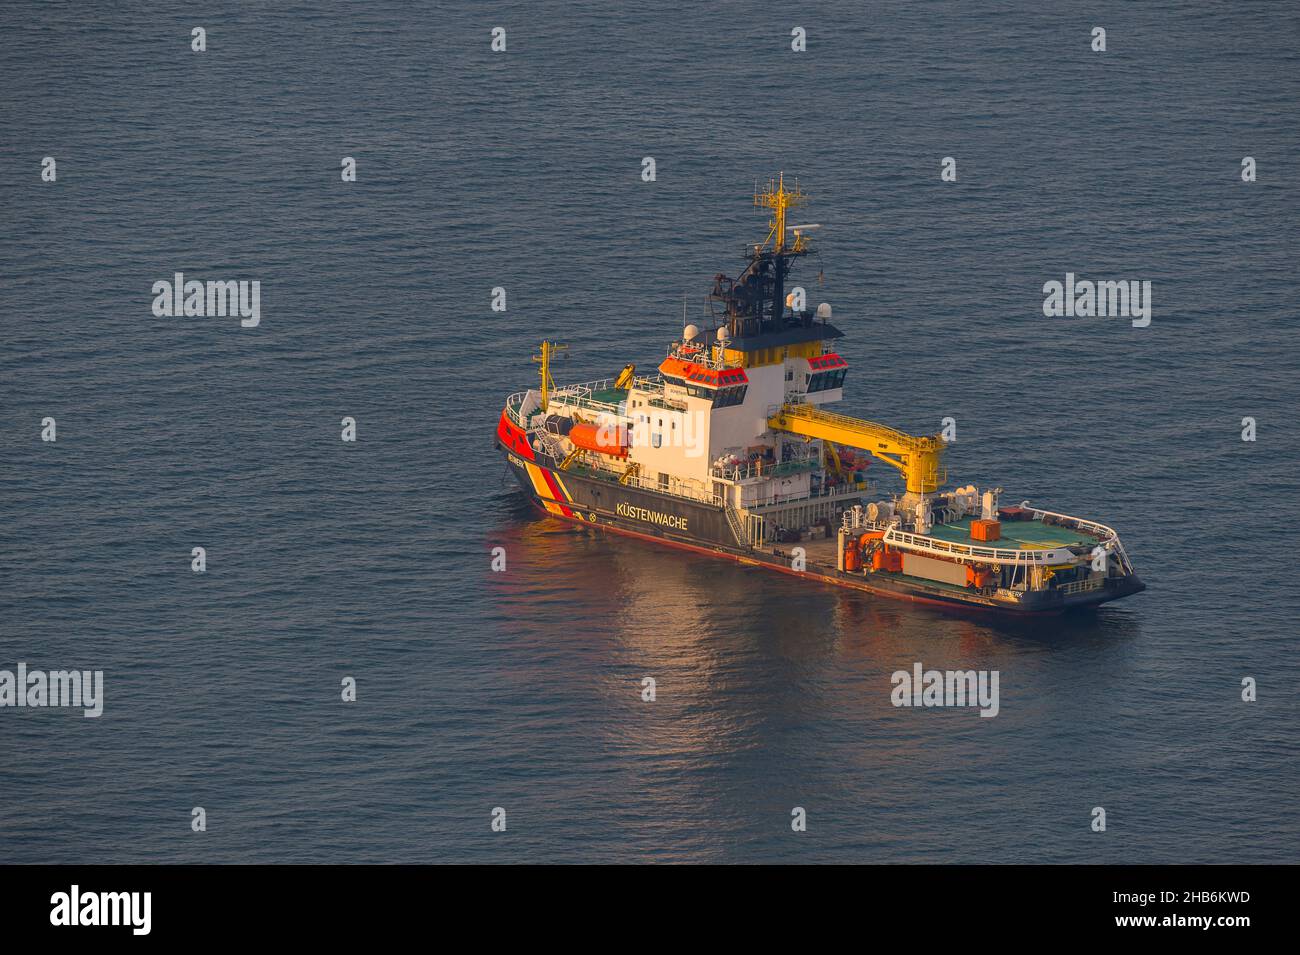 Ship MS Neuwerk of the German Coast Guard lies at anchor in the Elbe estuary, aerial view, Germany, Hamburgisches Wattenmeer National Park Stock Photo